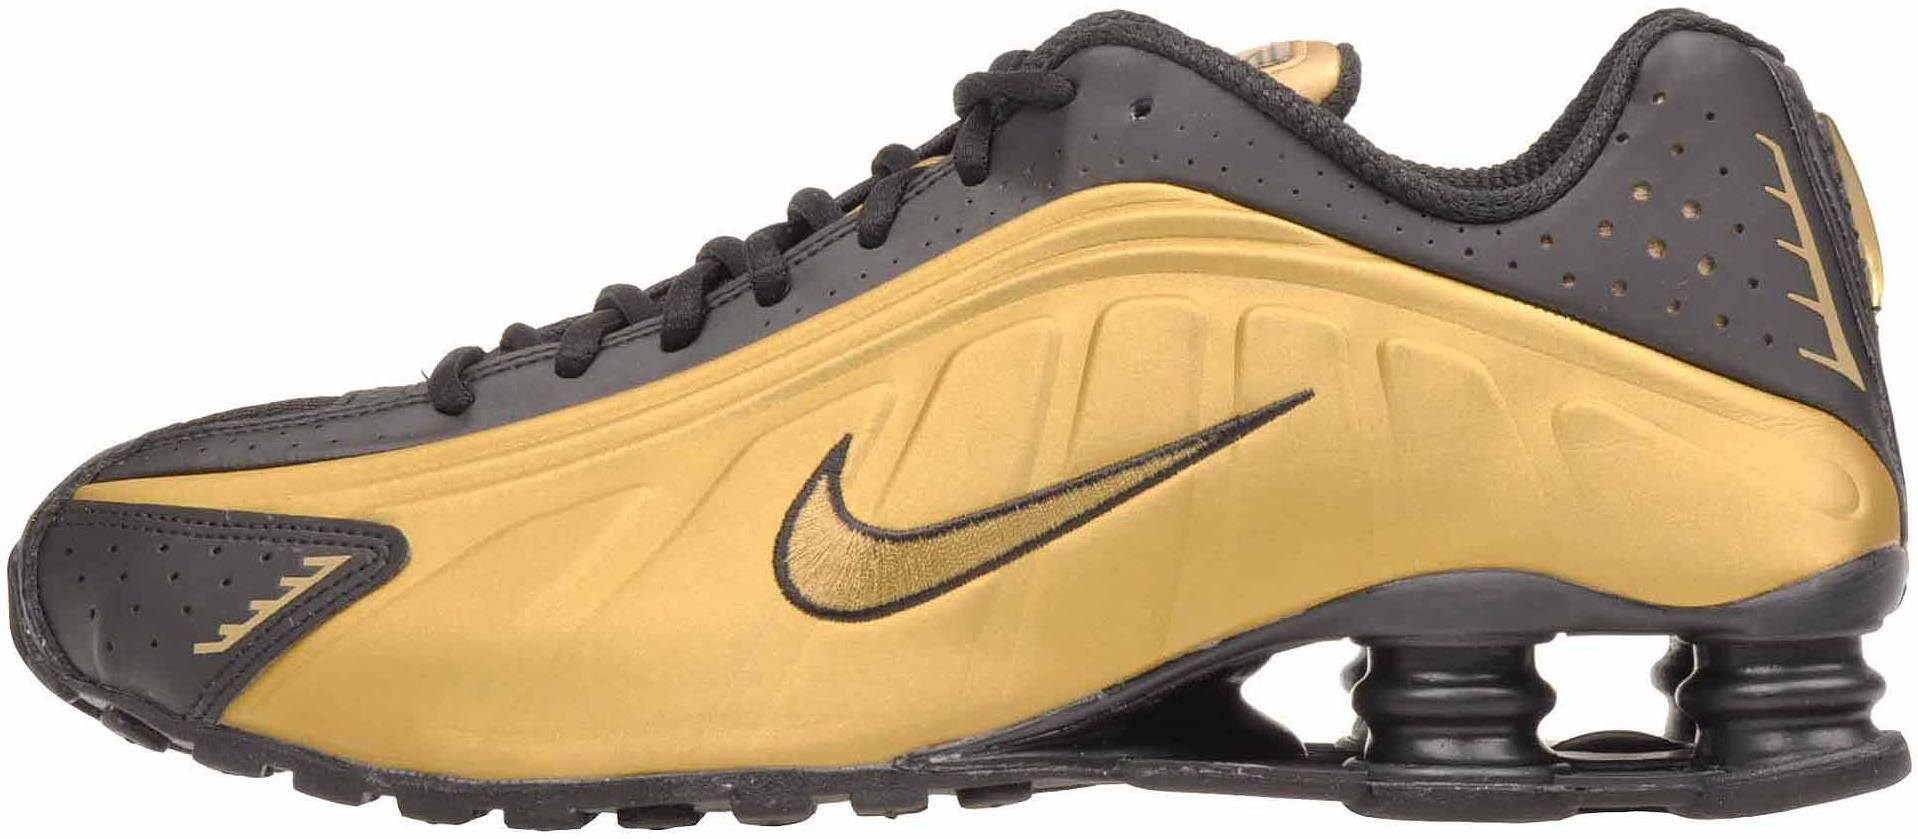 nike black and gold sneakers